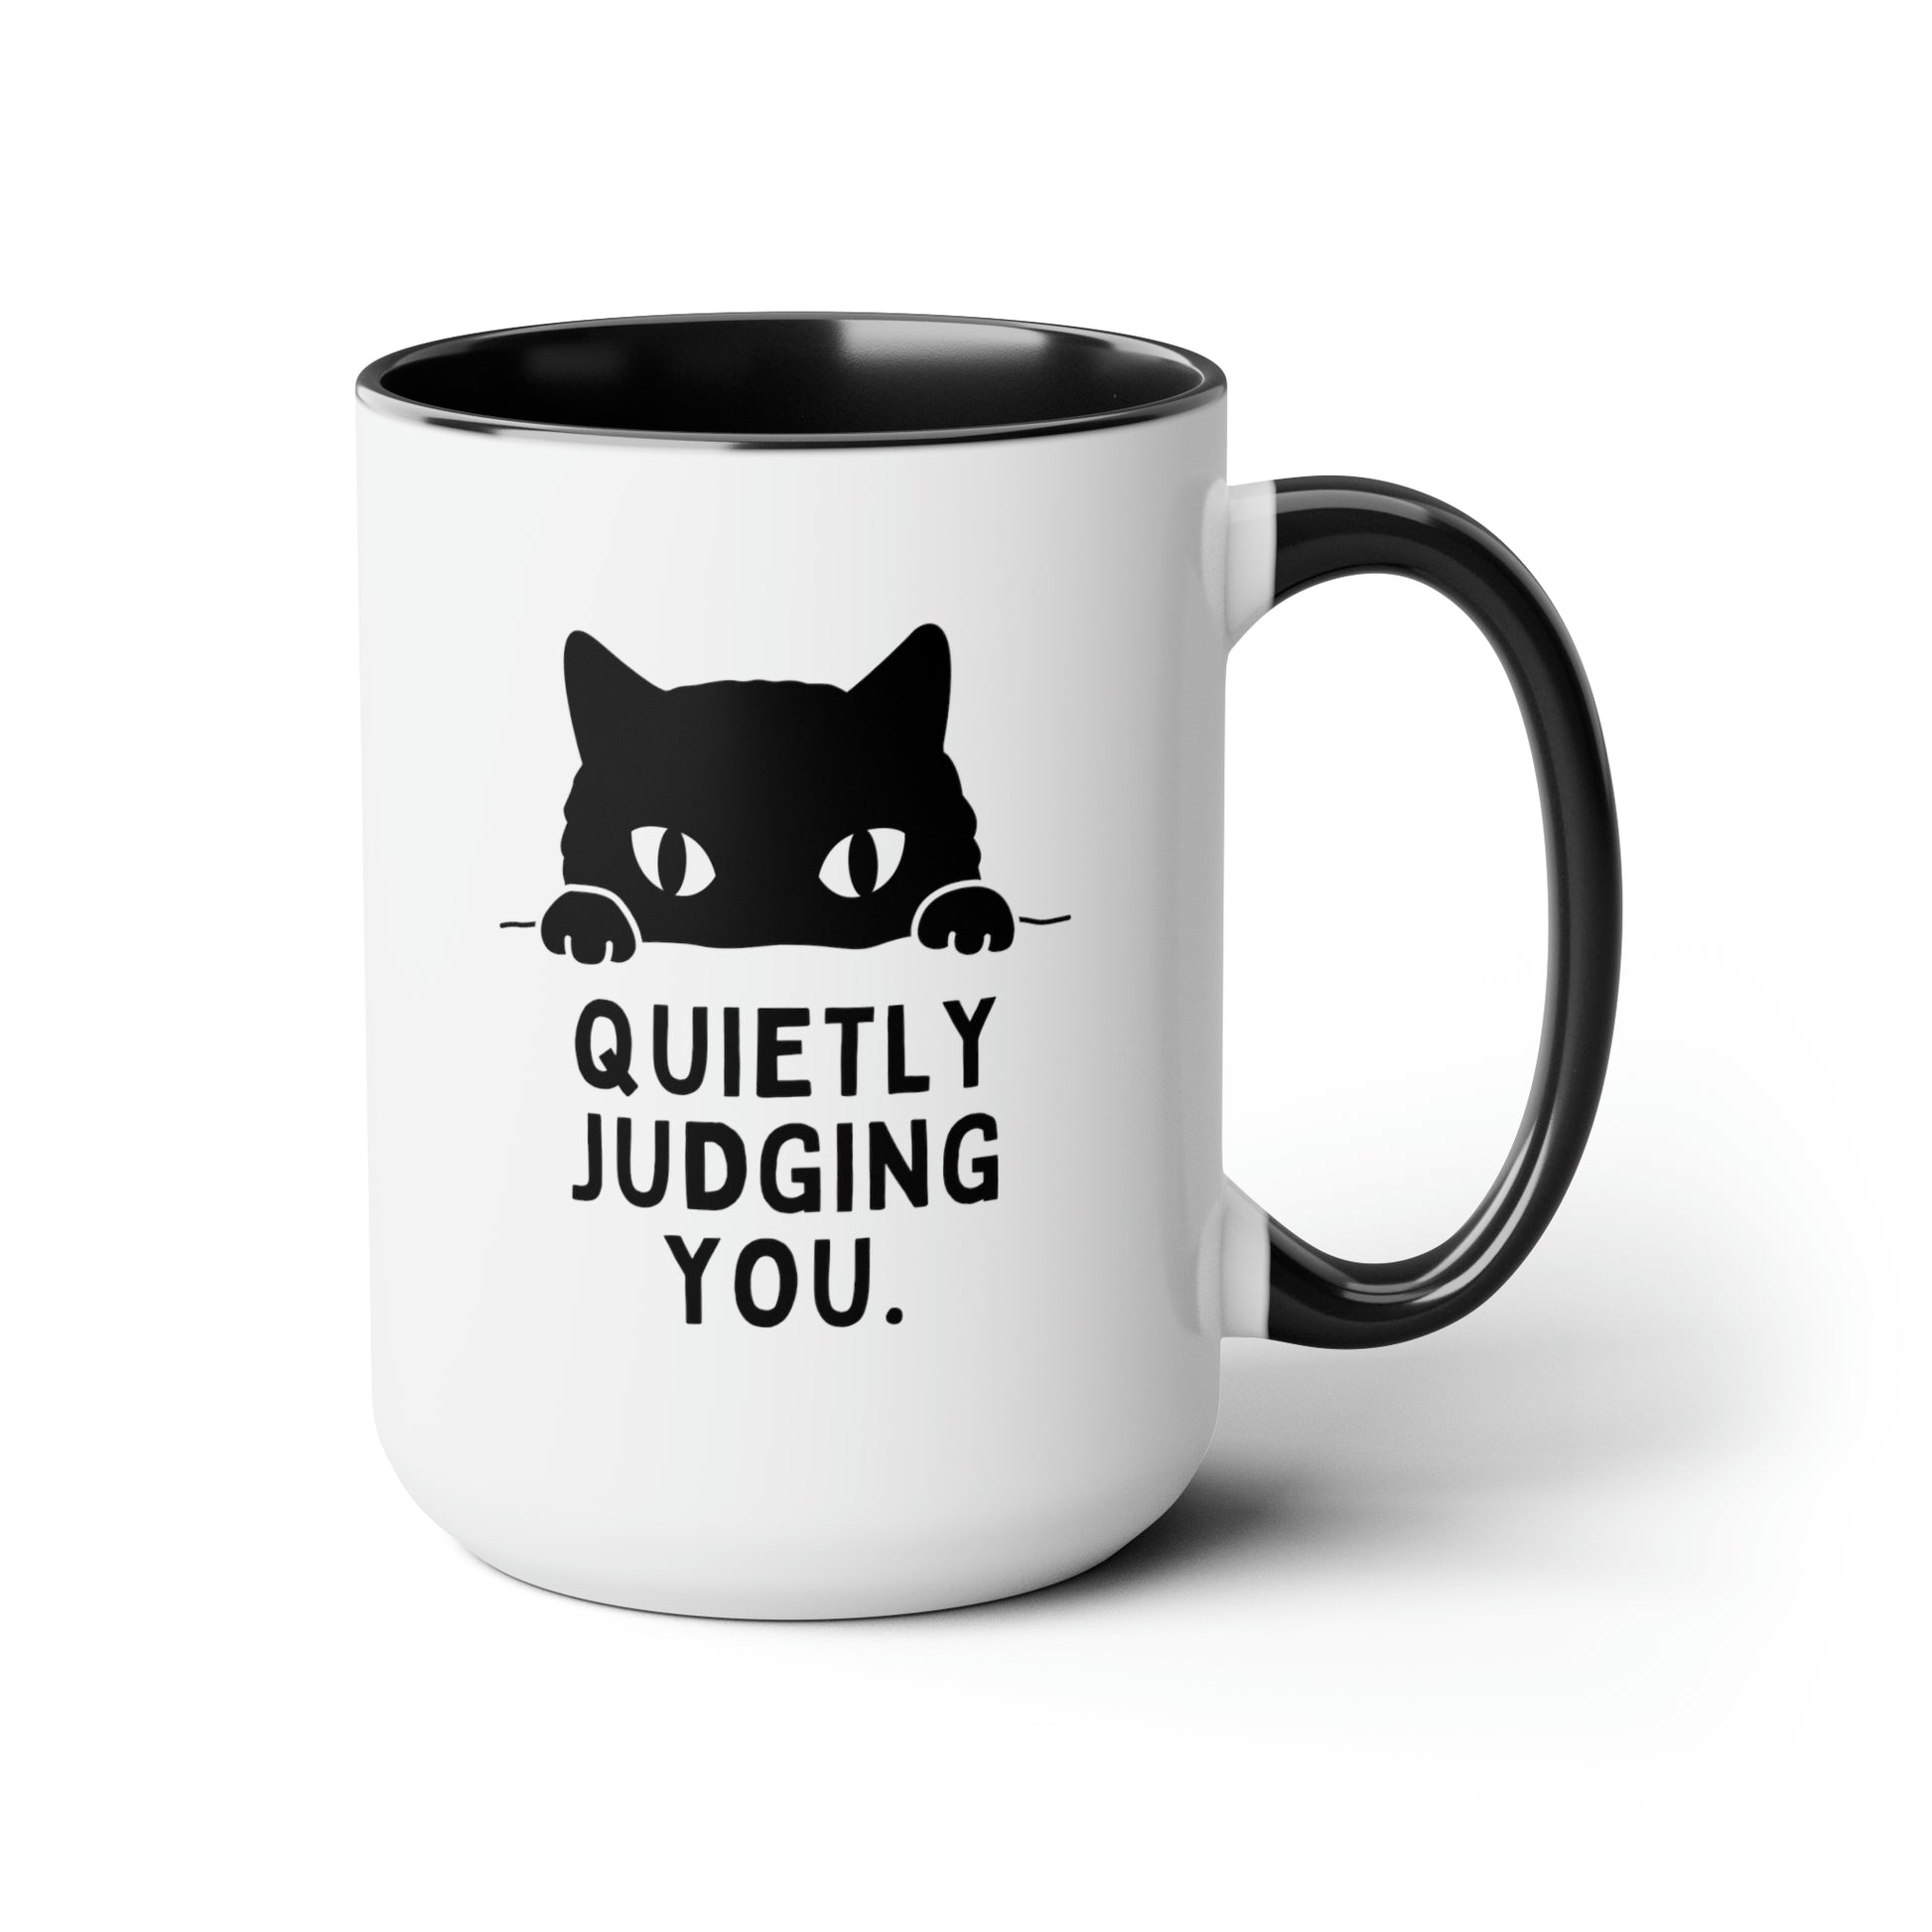 Quietly Judging You 15oz white with black accent funny large coffee mug gift for cat mom cute peeking sarcastic quote tea cup feline lover waveywares wavey wares wavywares wavy wares